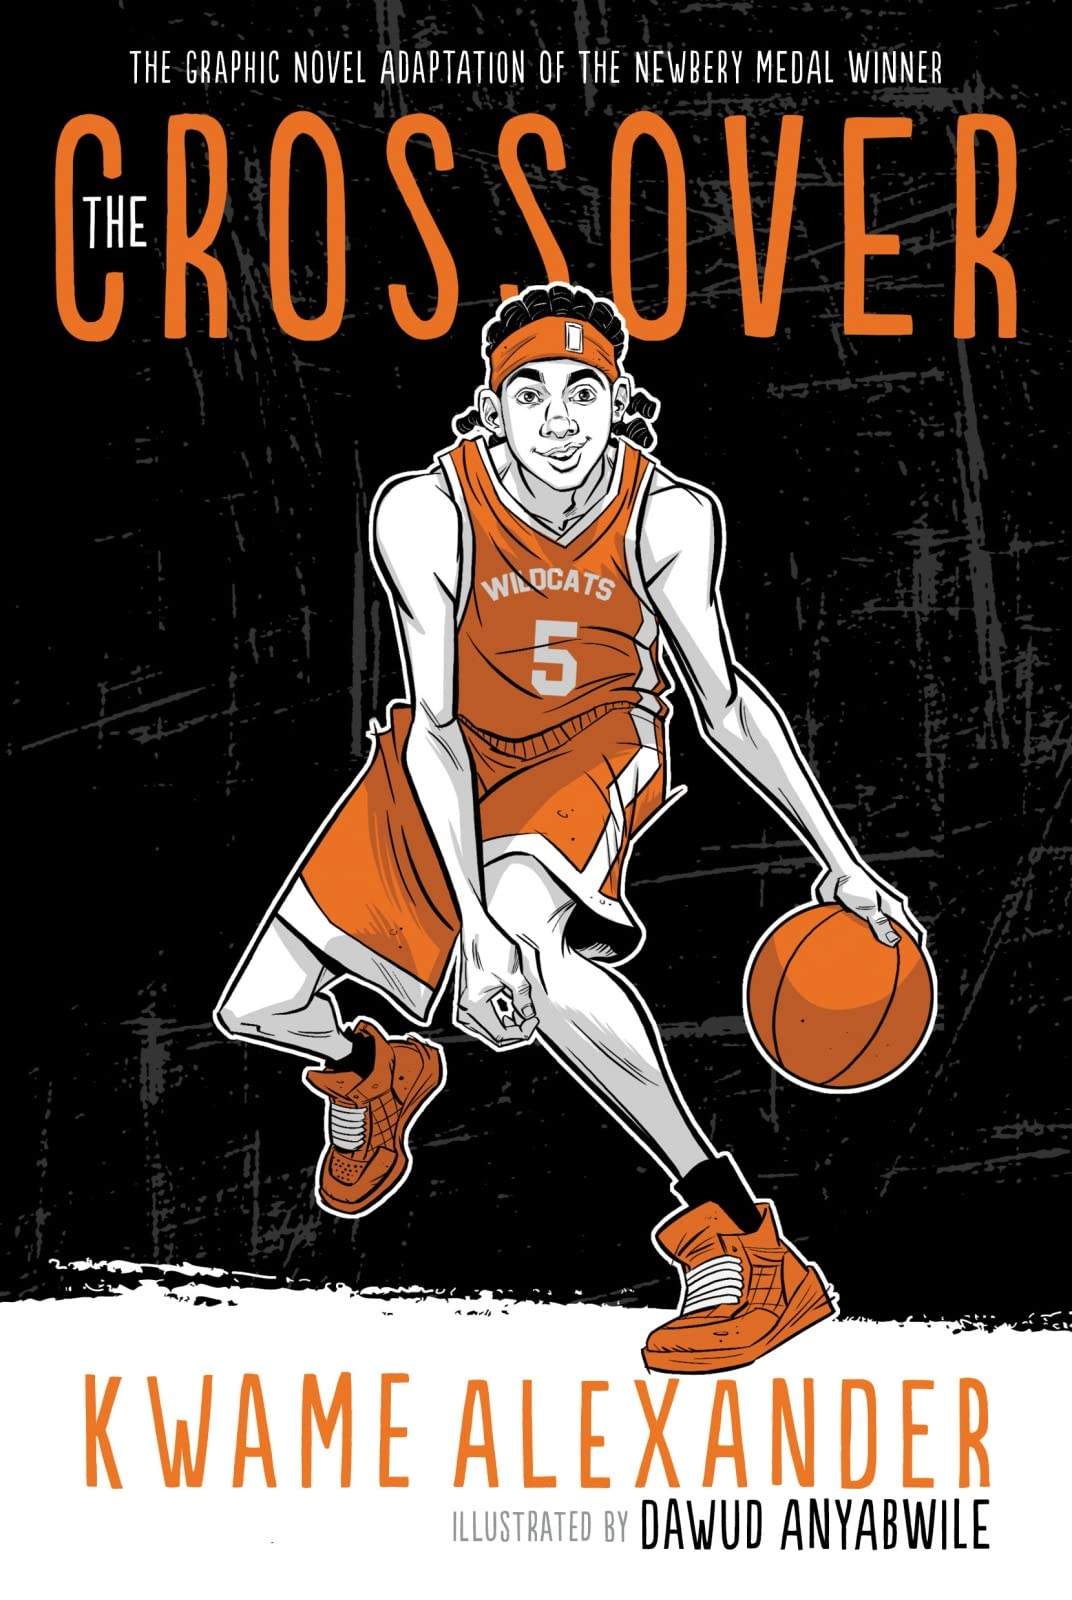 Book Cover of The Crossover by Kwame Alexander